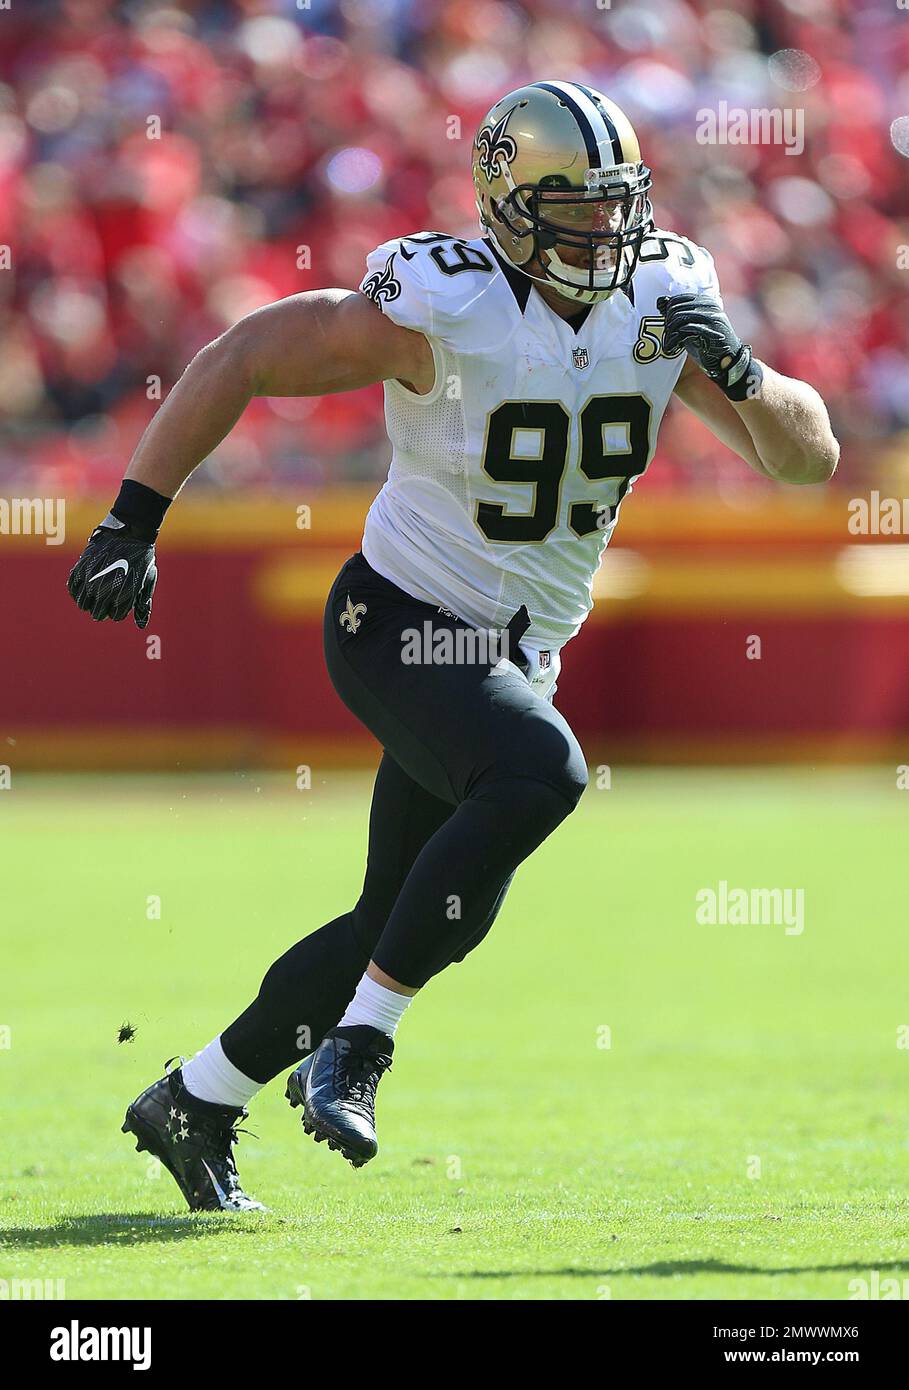 New Orleans Saints defensive end Paul Kruger (99) rushes against the